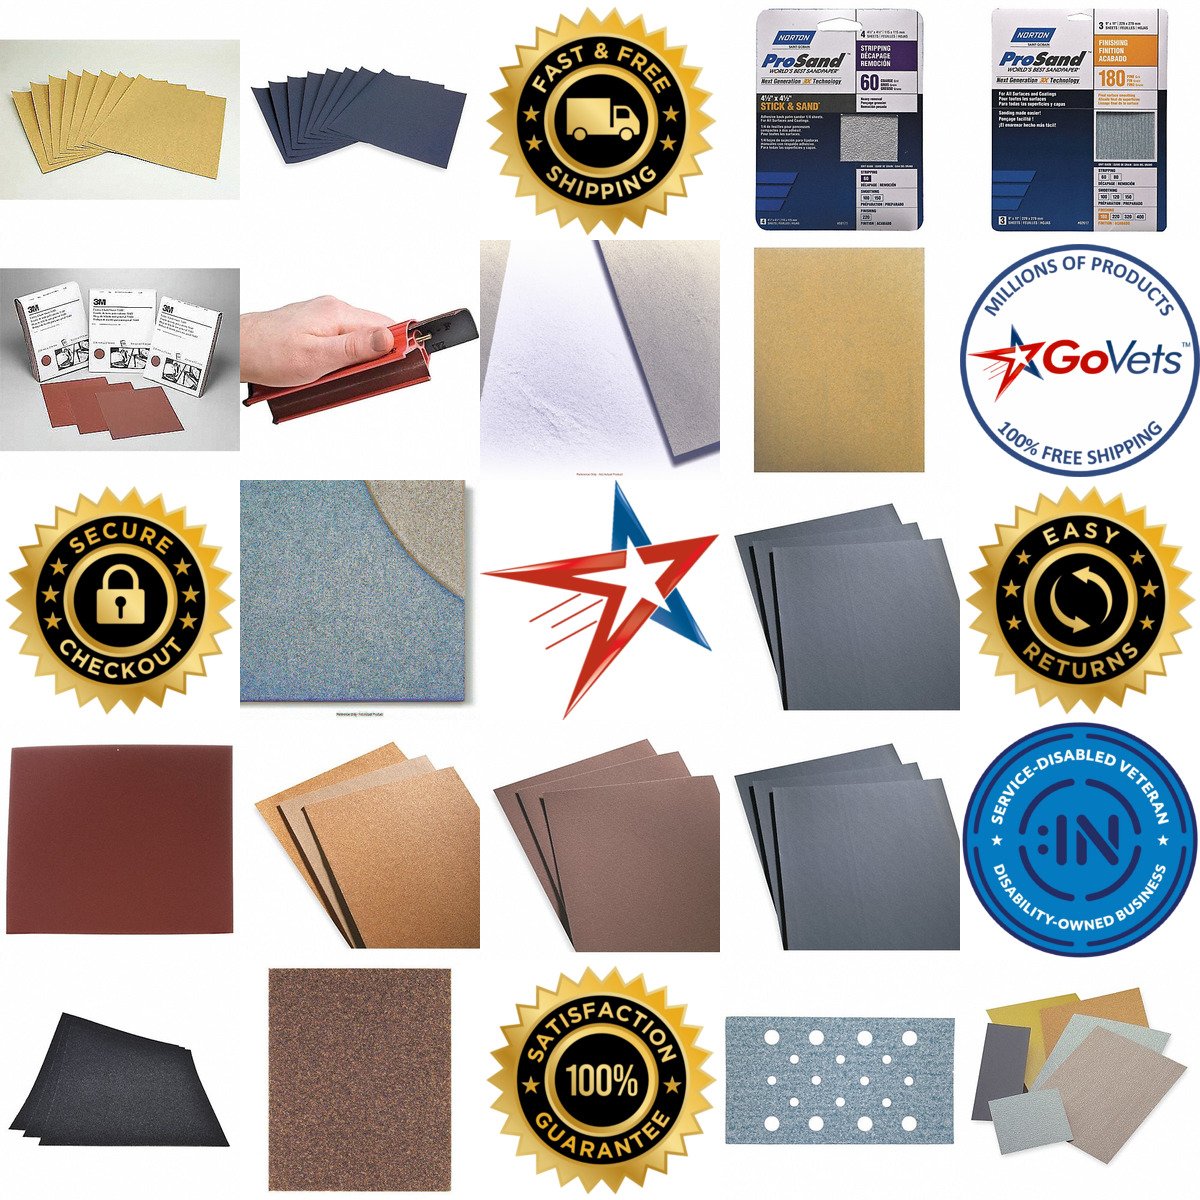 A selection of Sandpaper and Kits products on GoVets